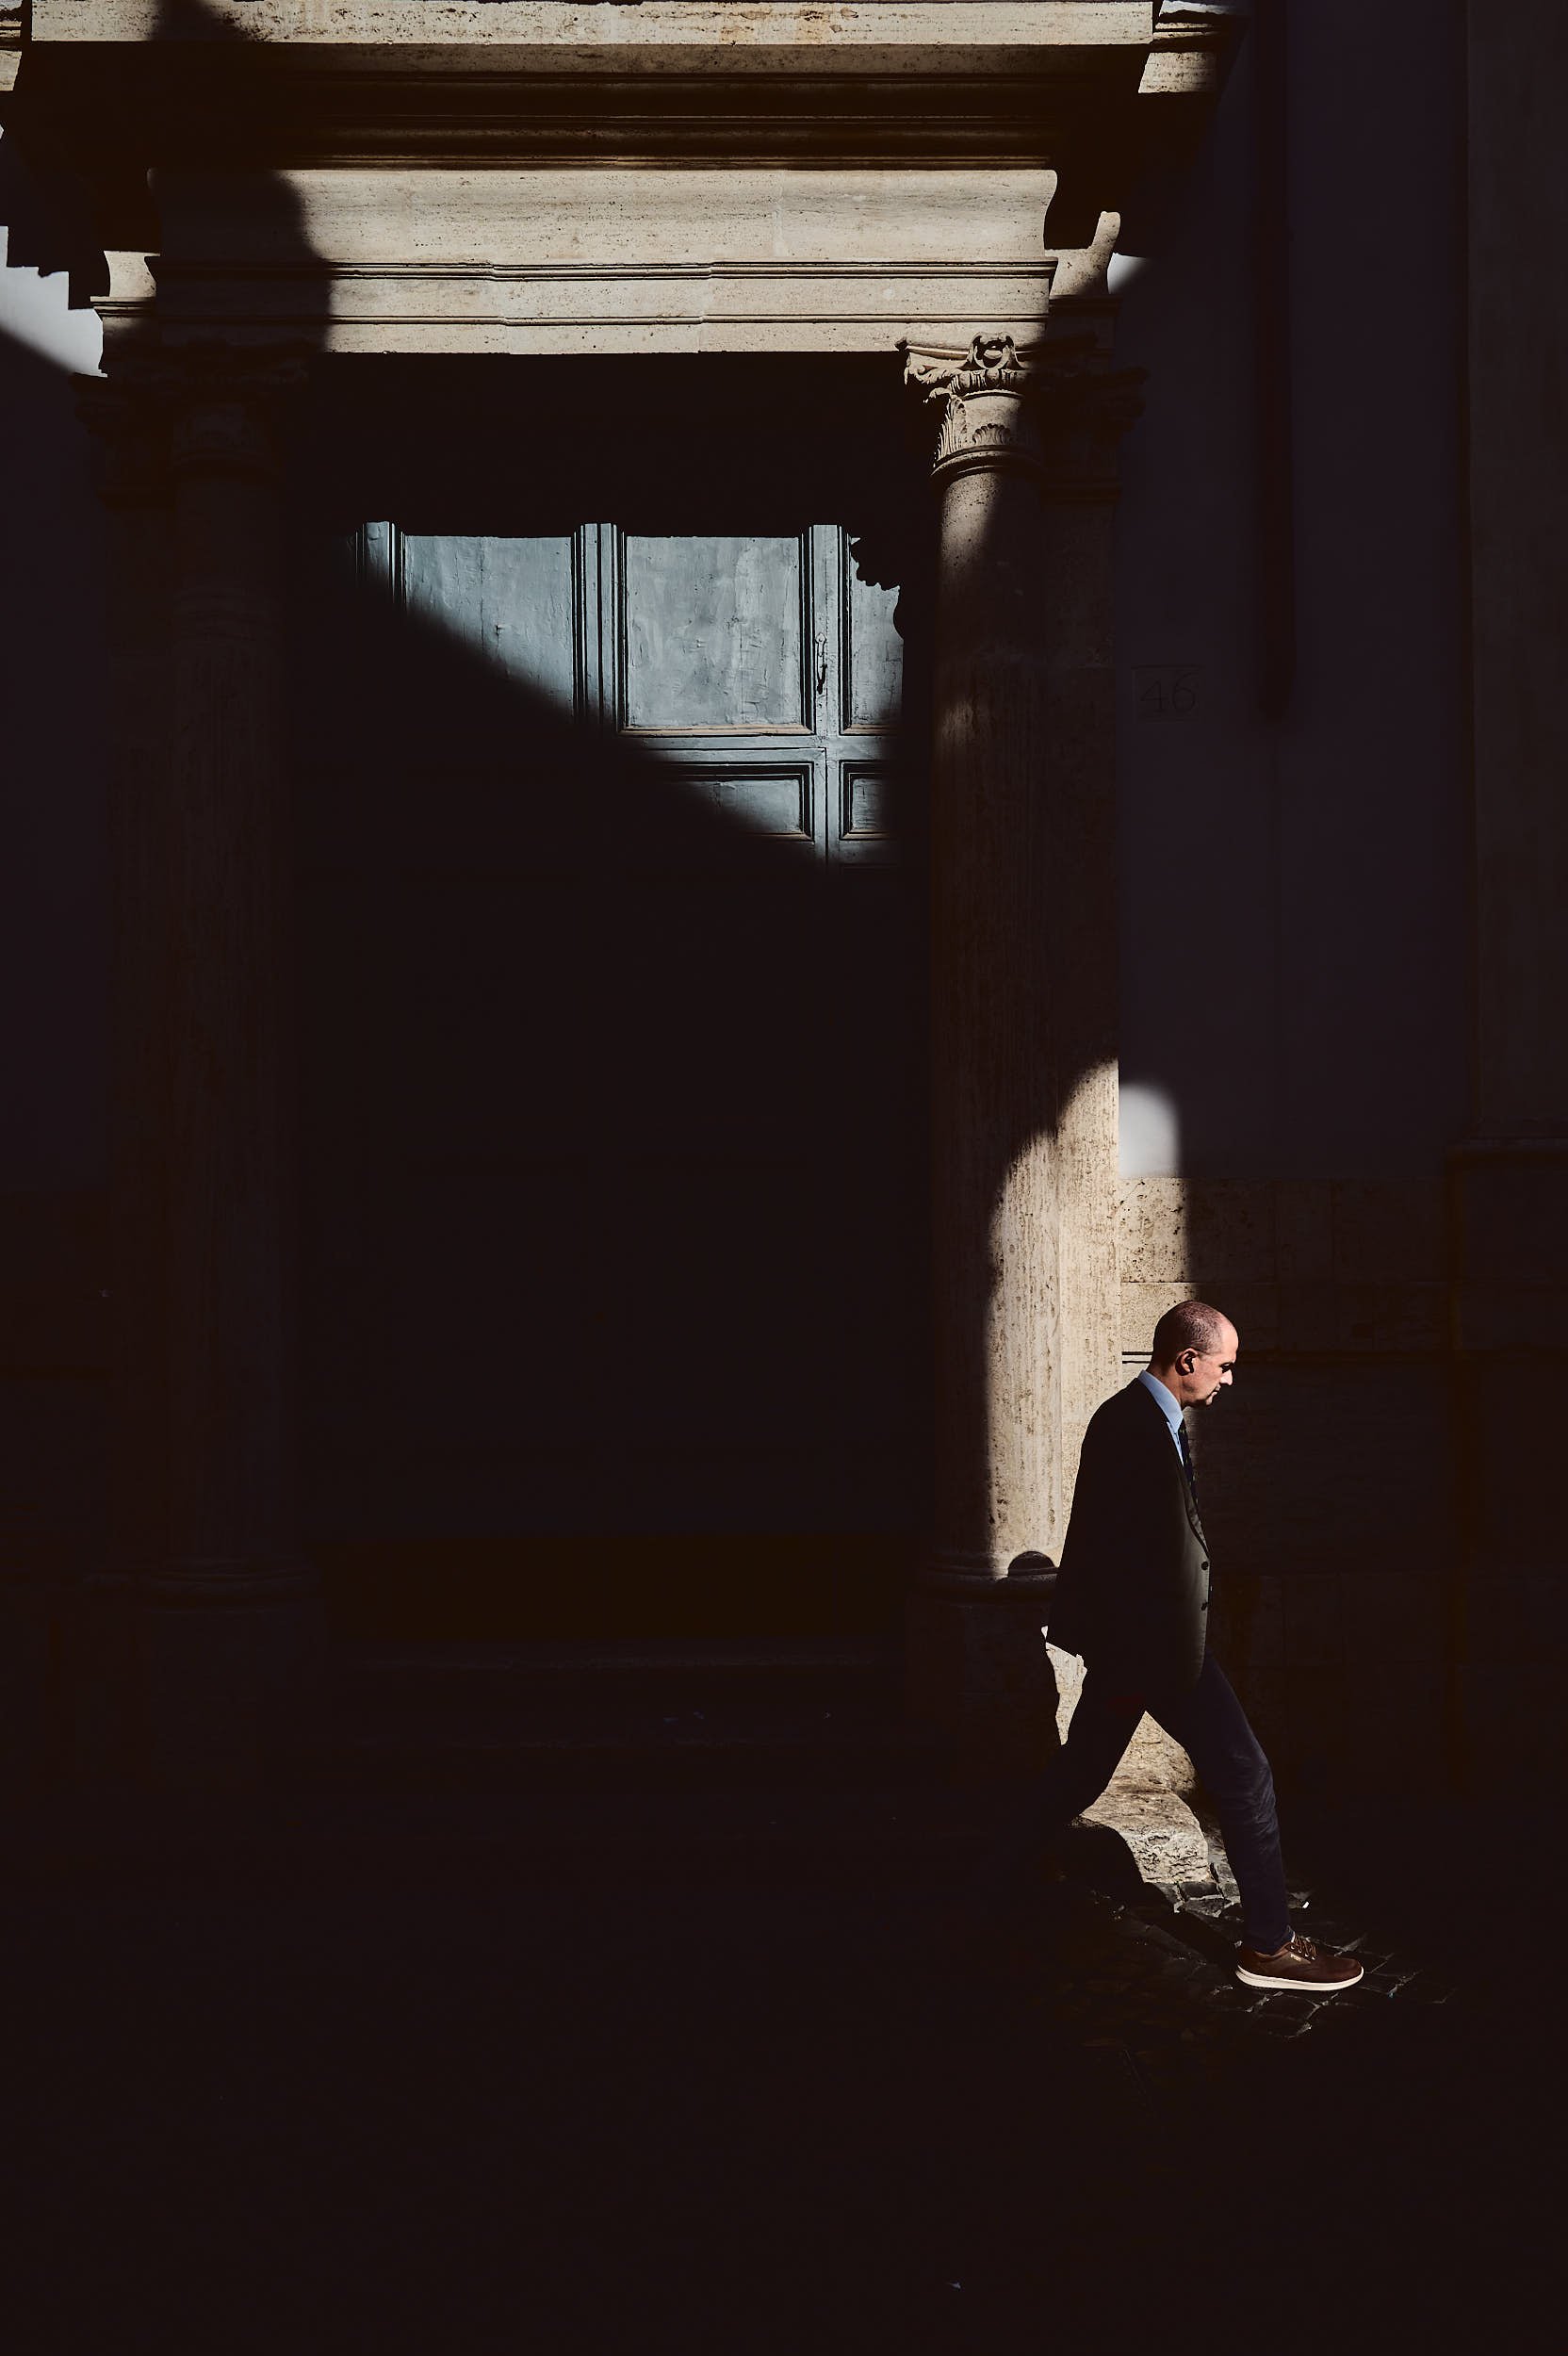 A man walking in front of an historic church in Rome